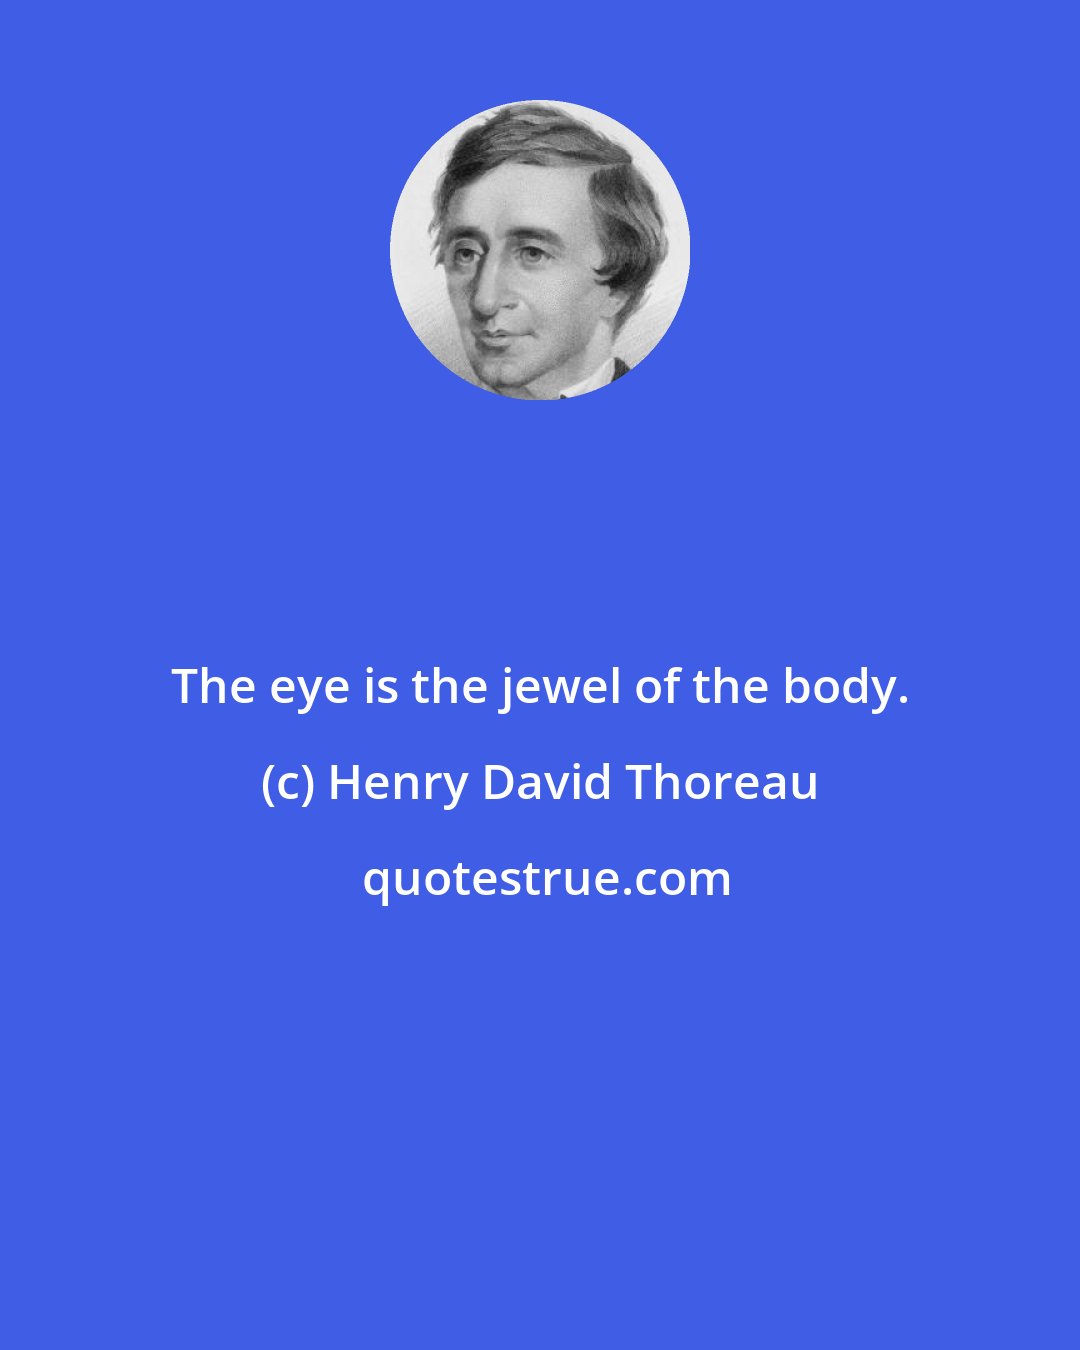 Henry David Thoreau: The eye is the jewel of the body.